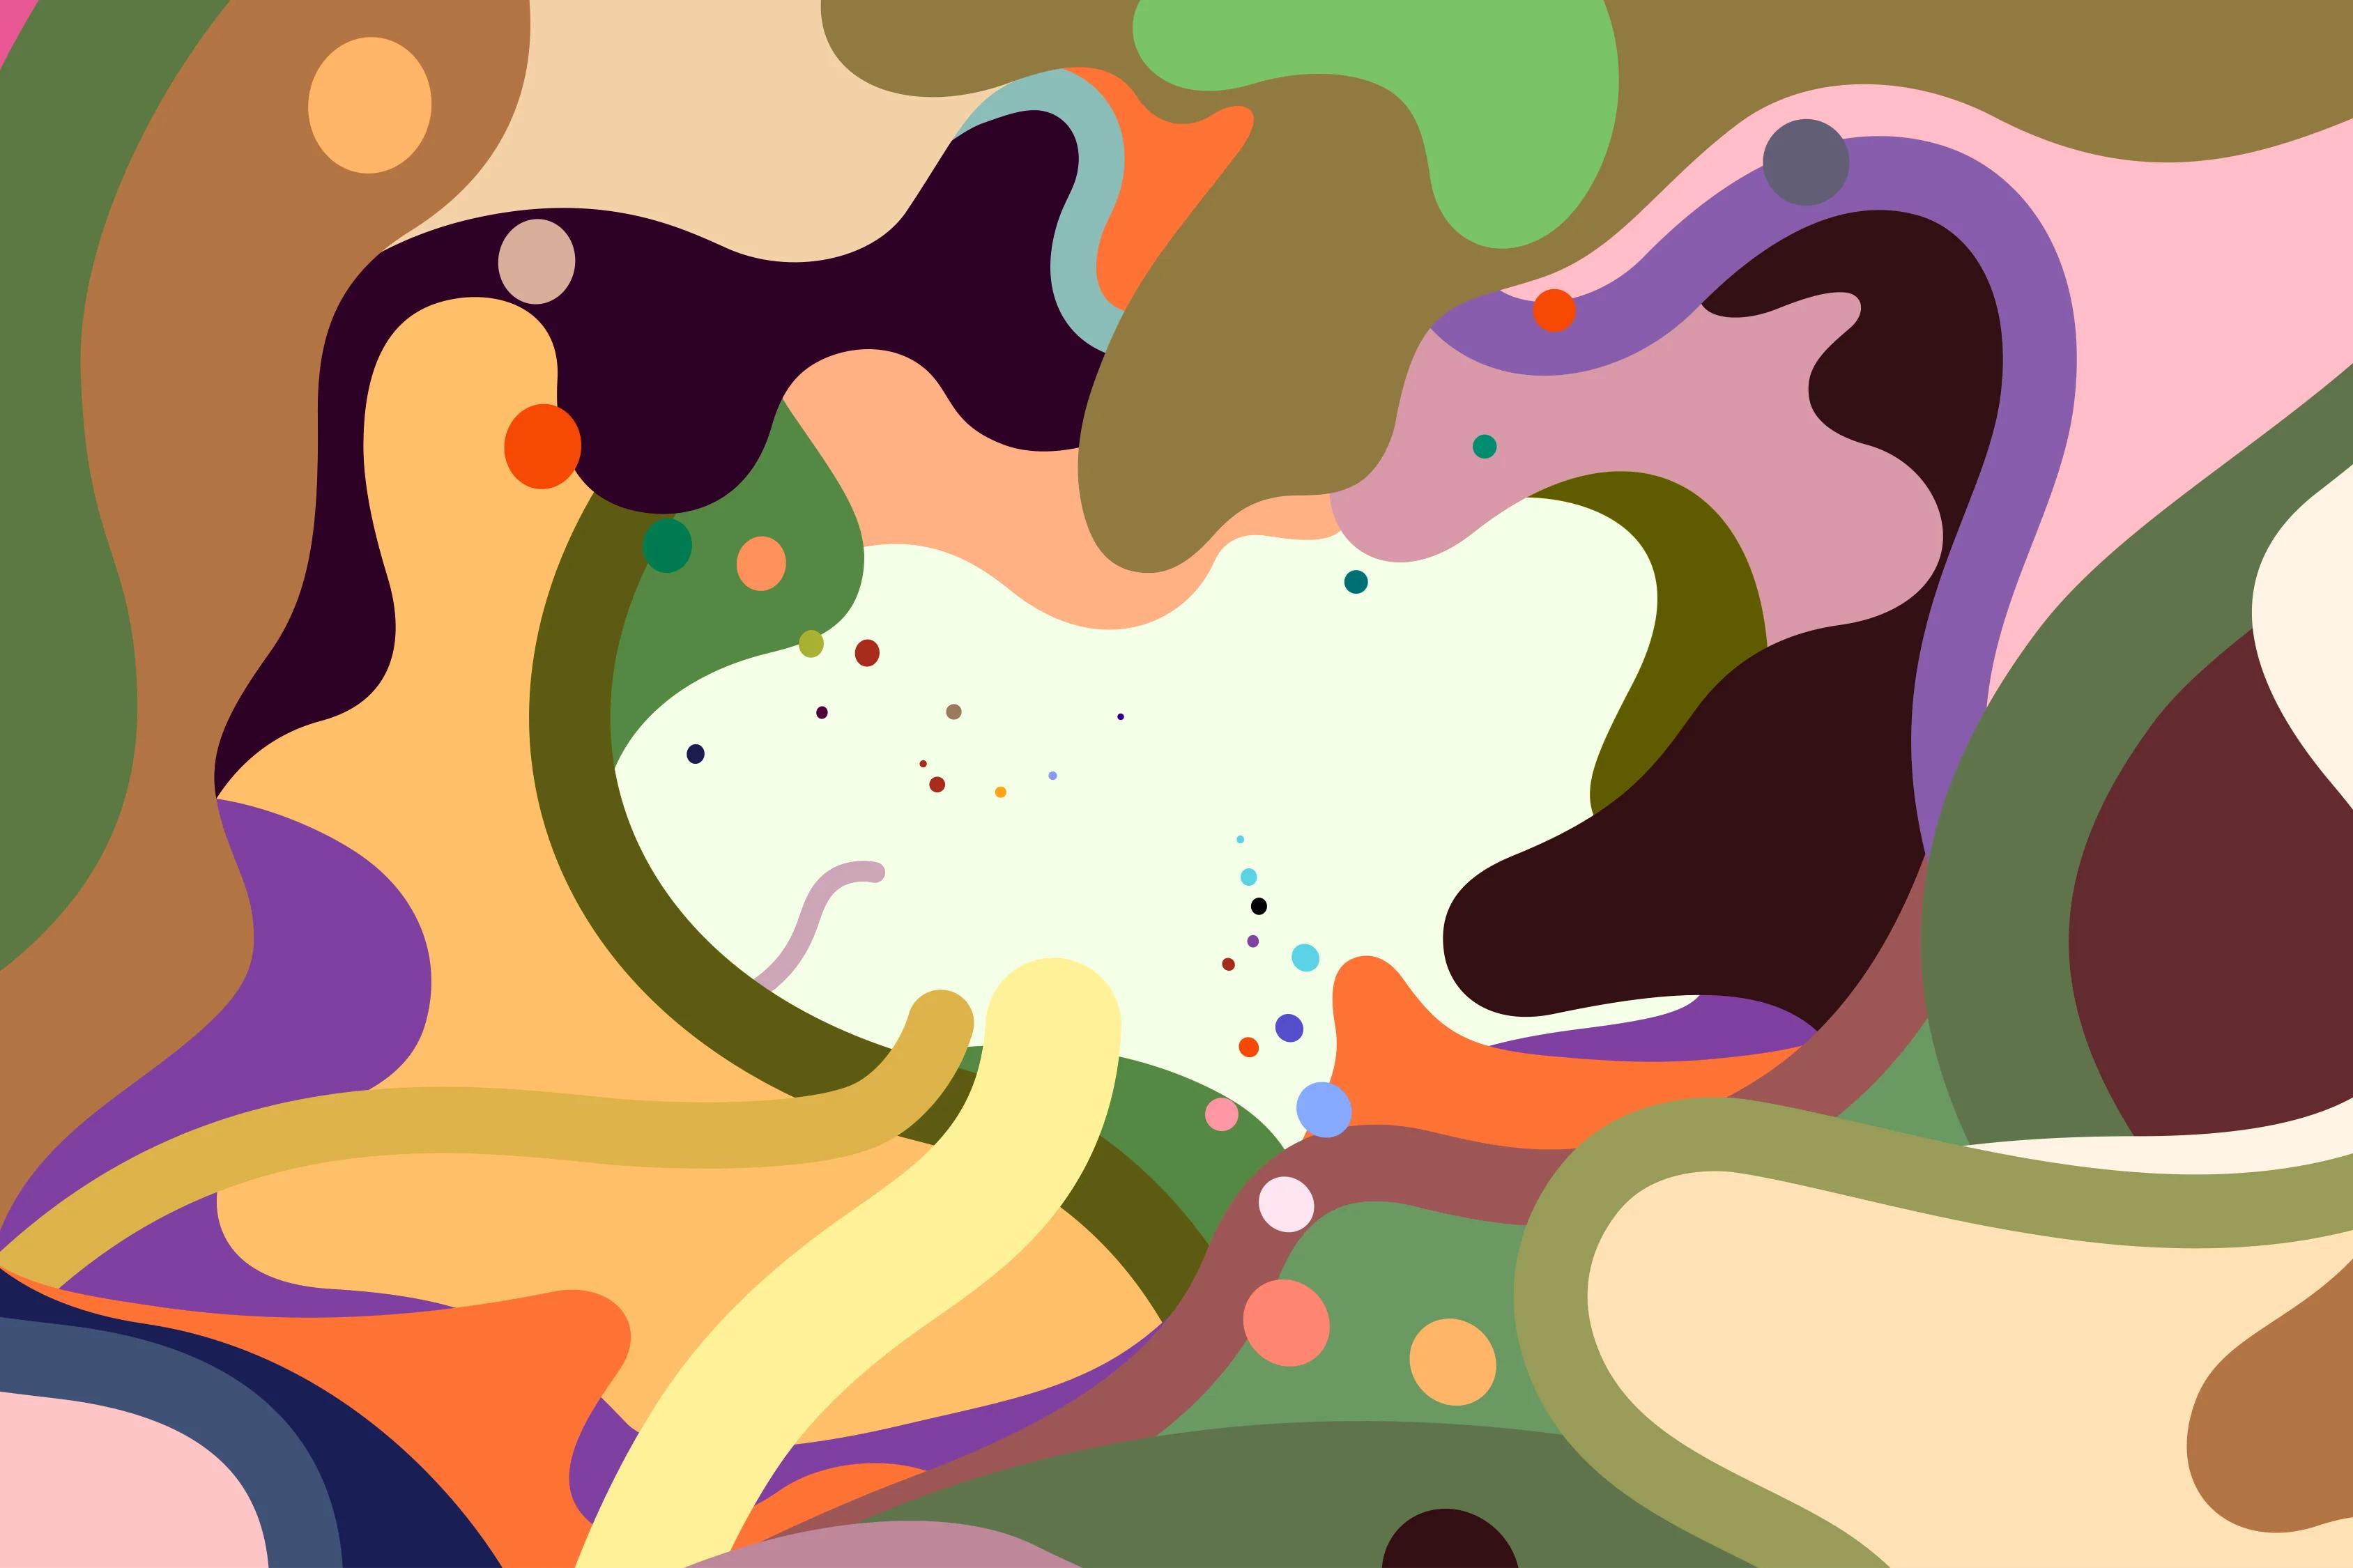 Colorful illustration of abstract shapes